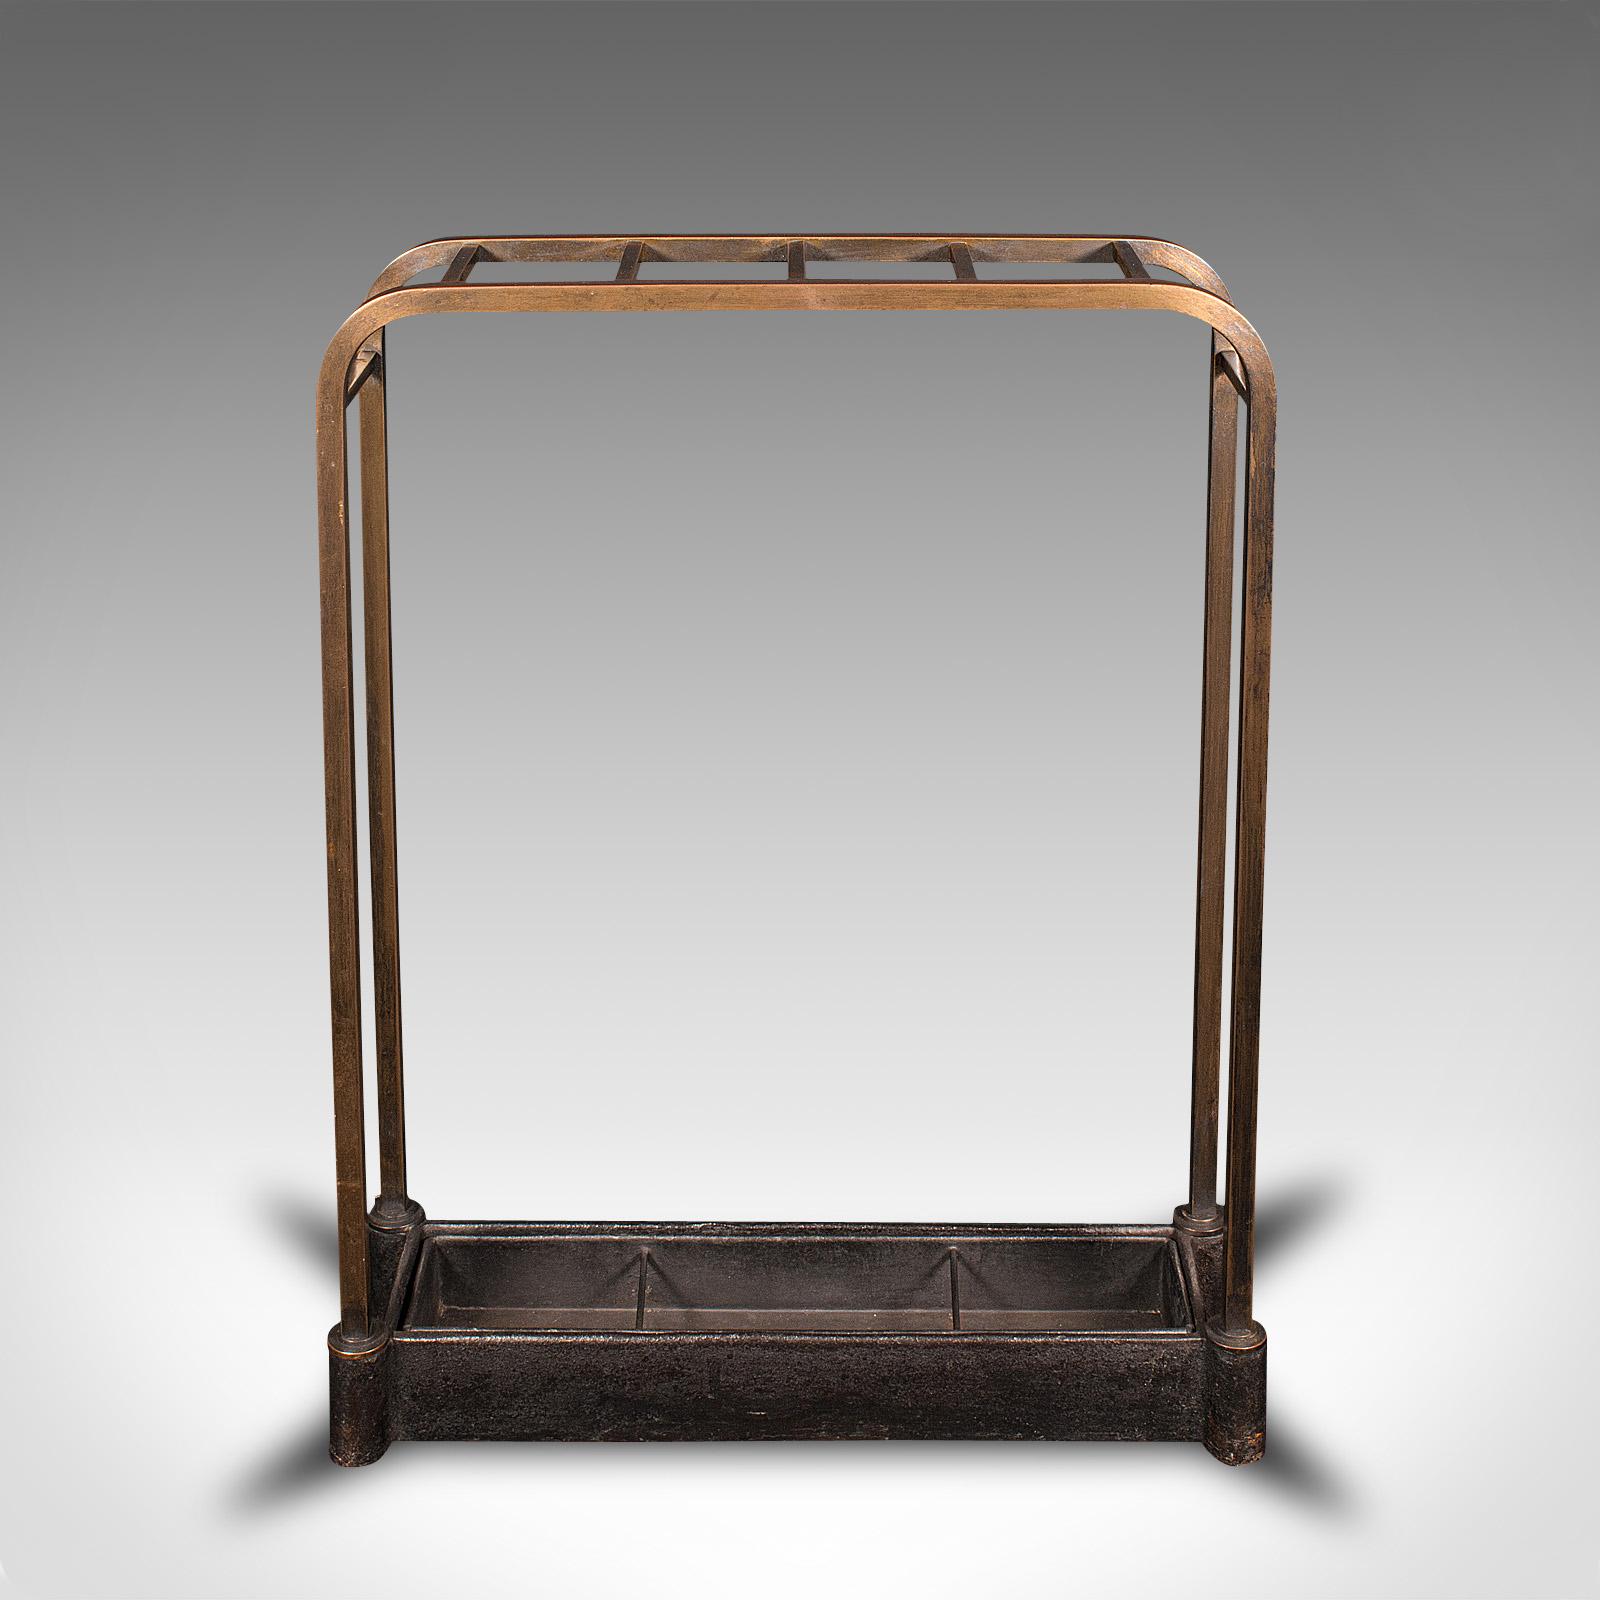 This is an antique segmented stick stand. An English, brass and cast iron umbrella rack with drip tray, dating to the late Victorian period, circa 1880.

Appealing and discrete, ideal for the entrance hall
Displays a desirable aged patina and in